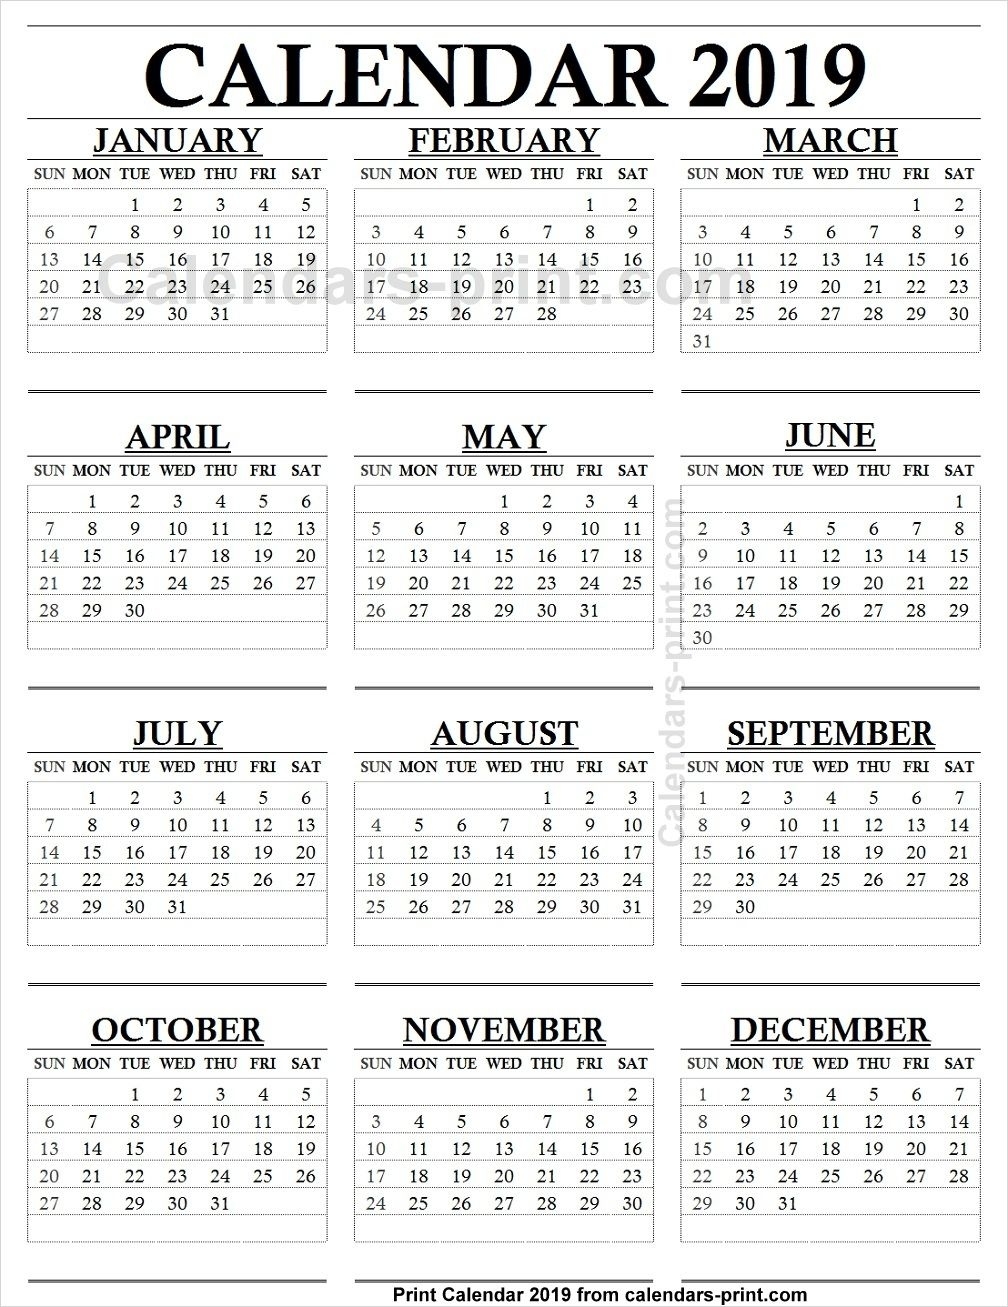 12 Month Calendar 2019 One Page | 2019 Yearly Calendar | Calendar 4 Calendar Months On One Page